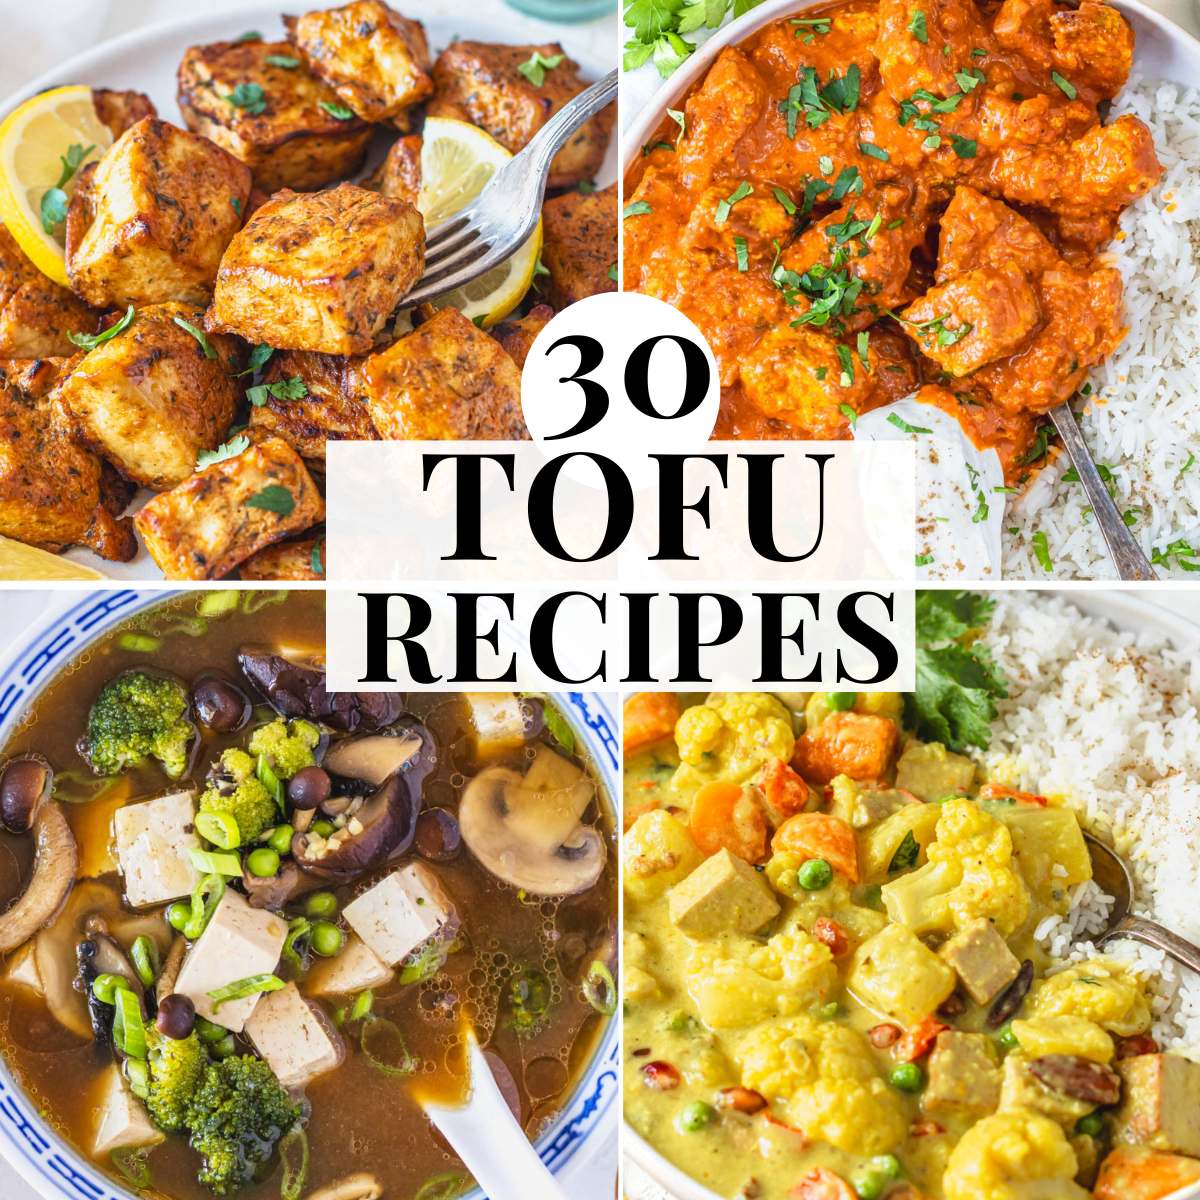 Easy tofu recipes with lunches and dinner meals